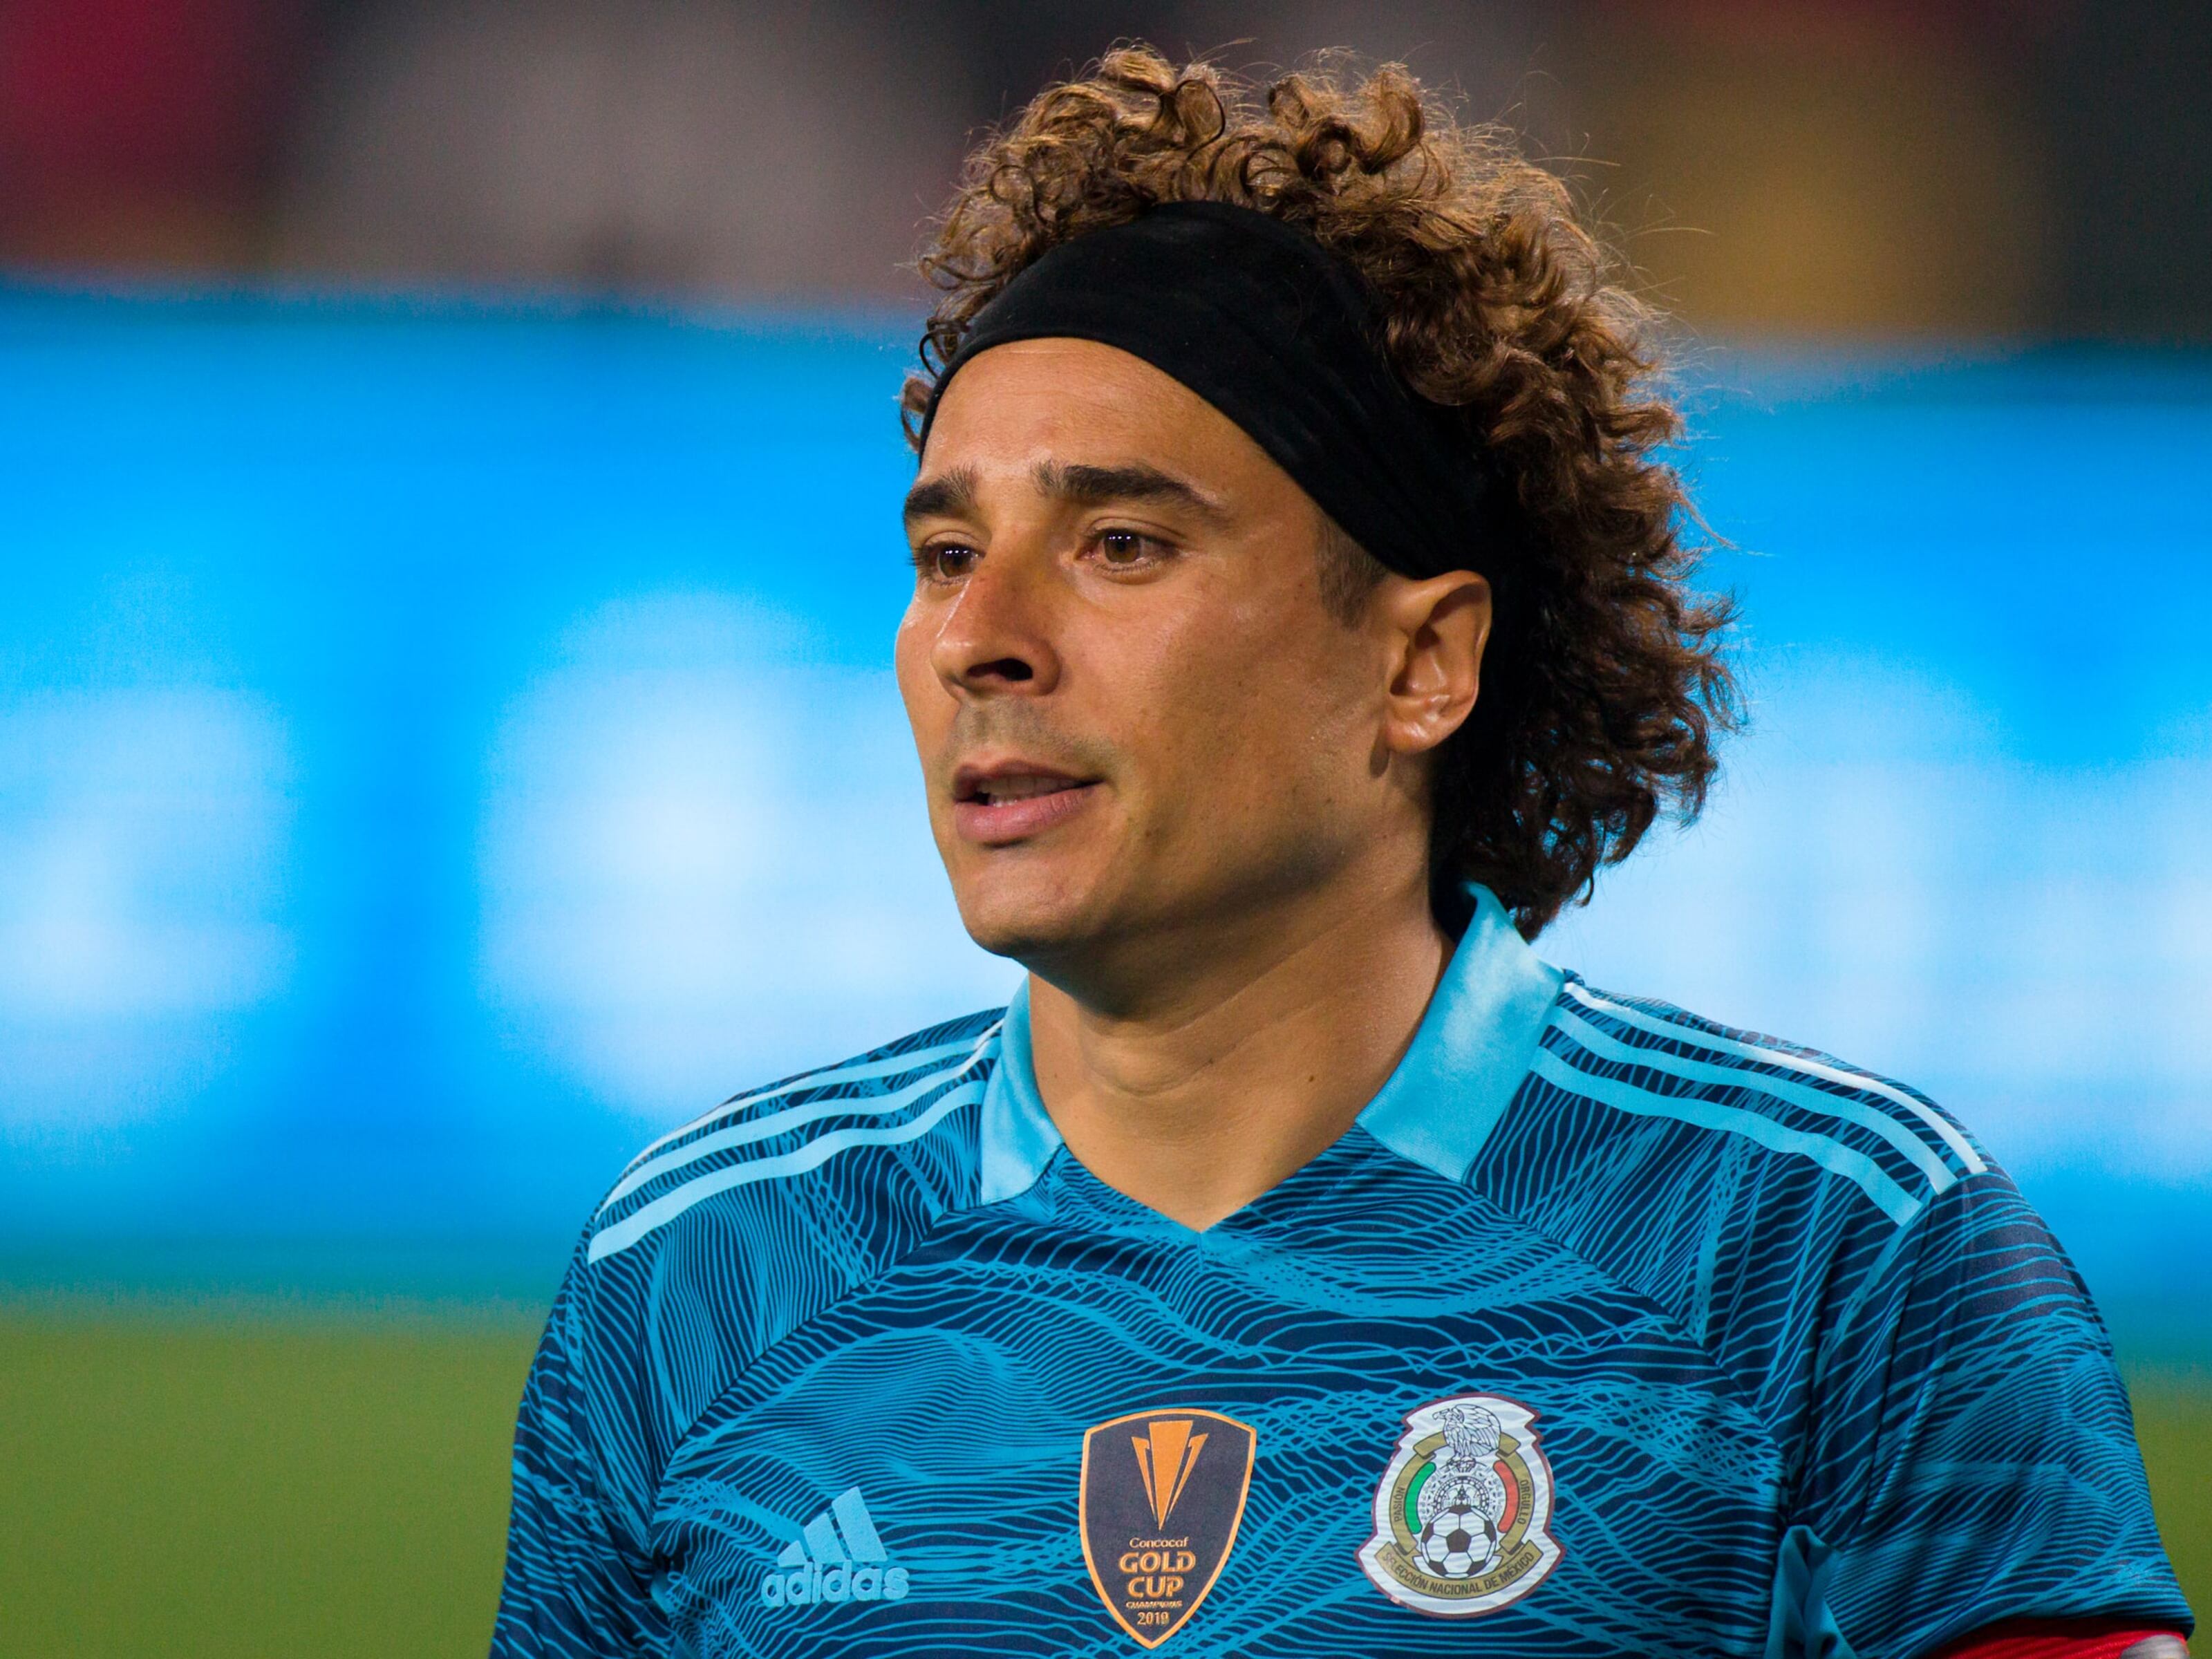 Guillermo Ochoa is a golden mine for Televisa in El Tri, and just one coach tried to stop him